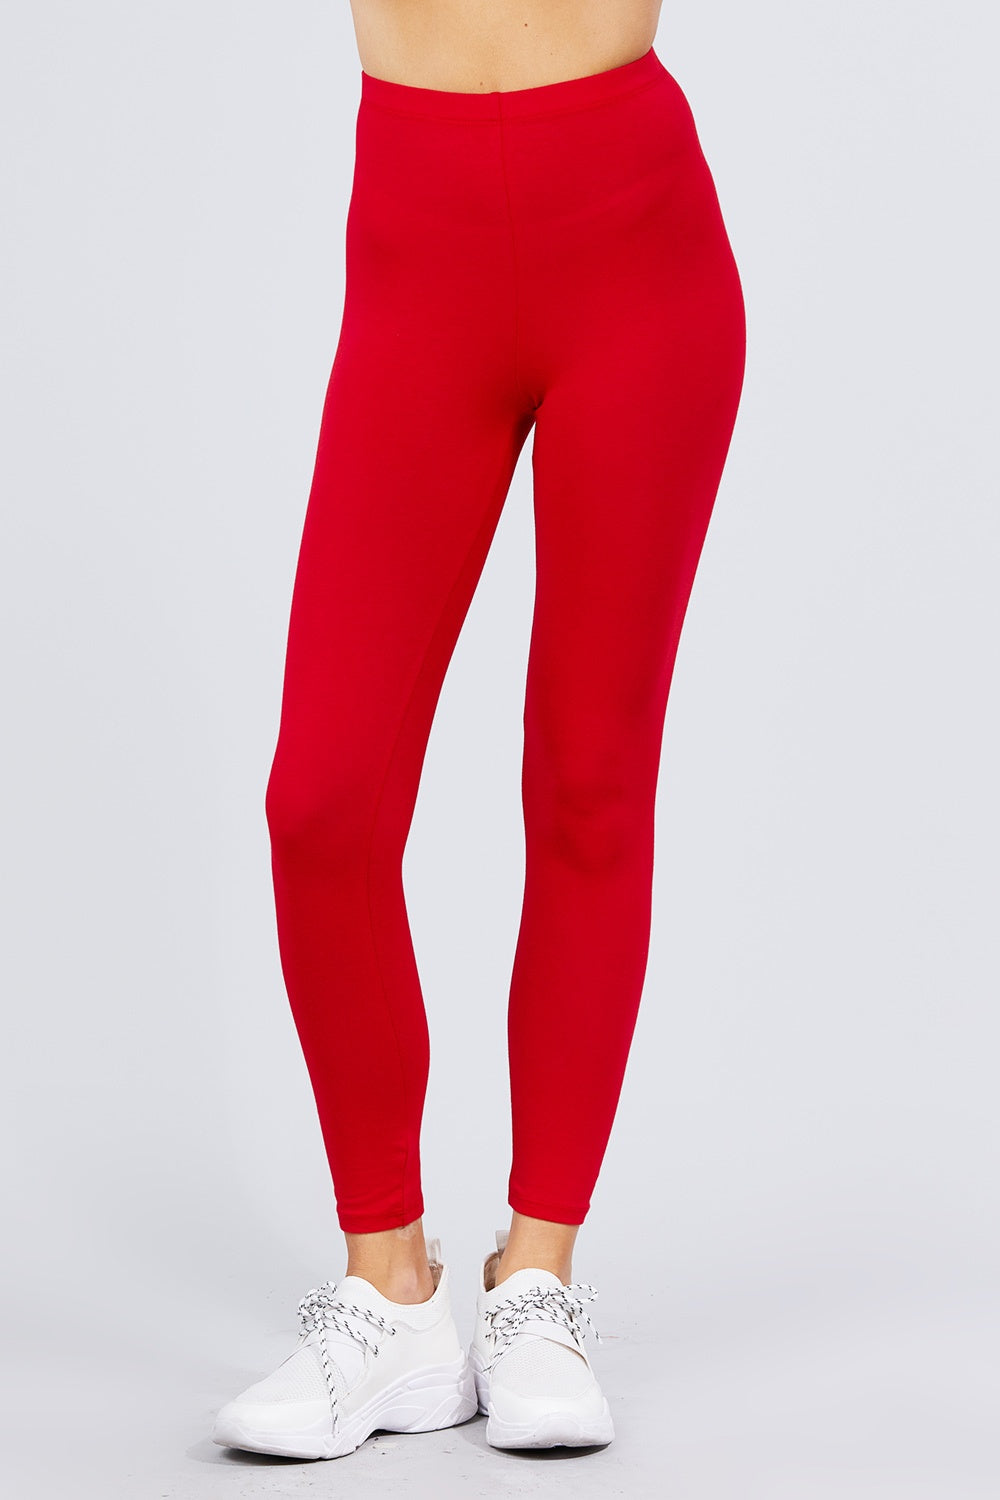 Cotton Spandex Jersey Long - Bold Red / S Pants Girl Code